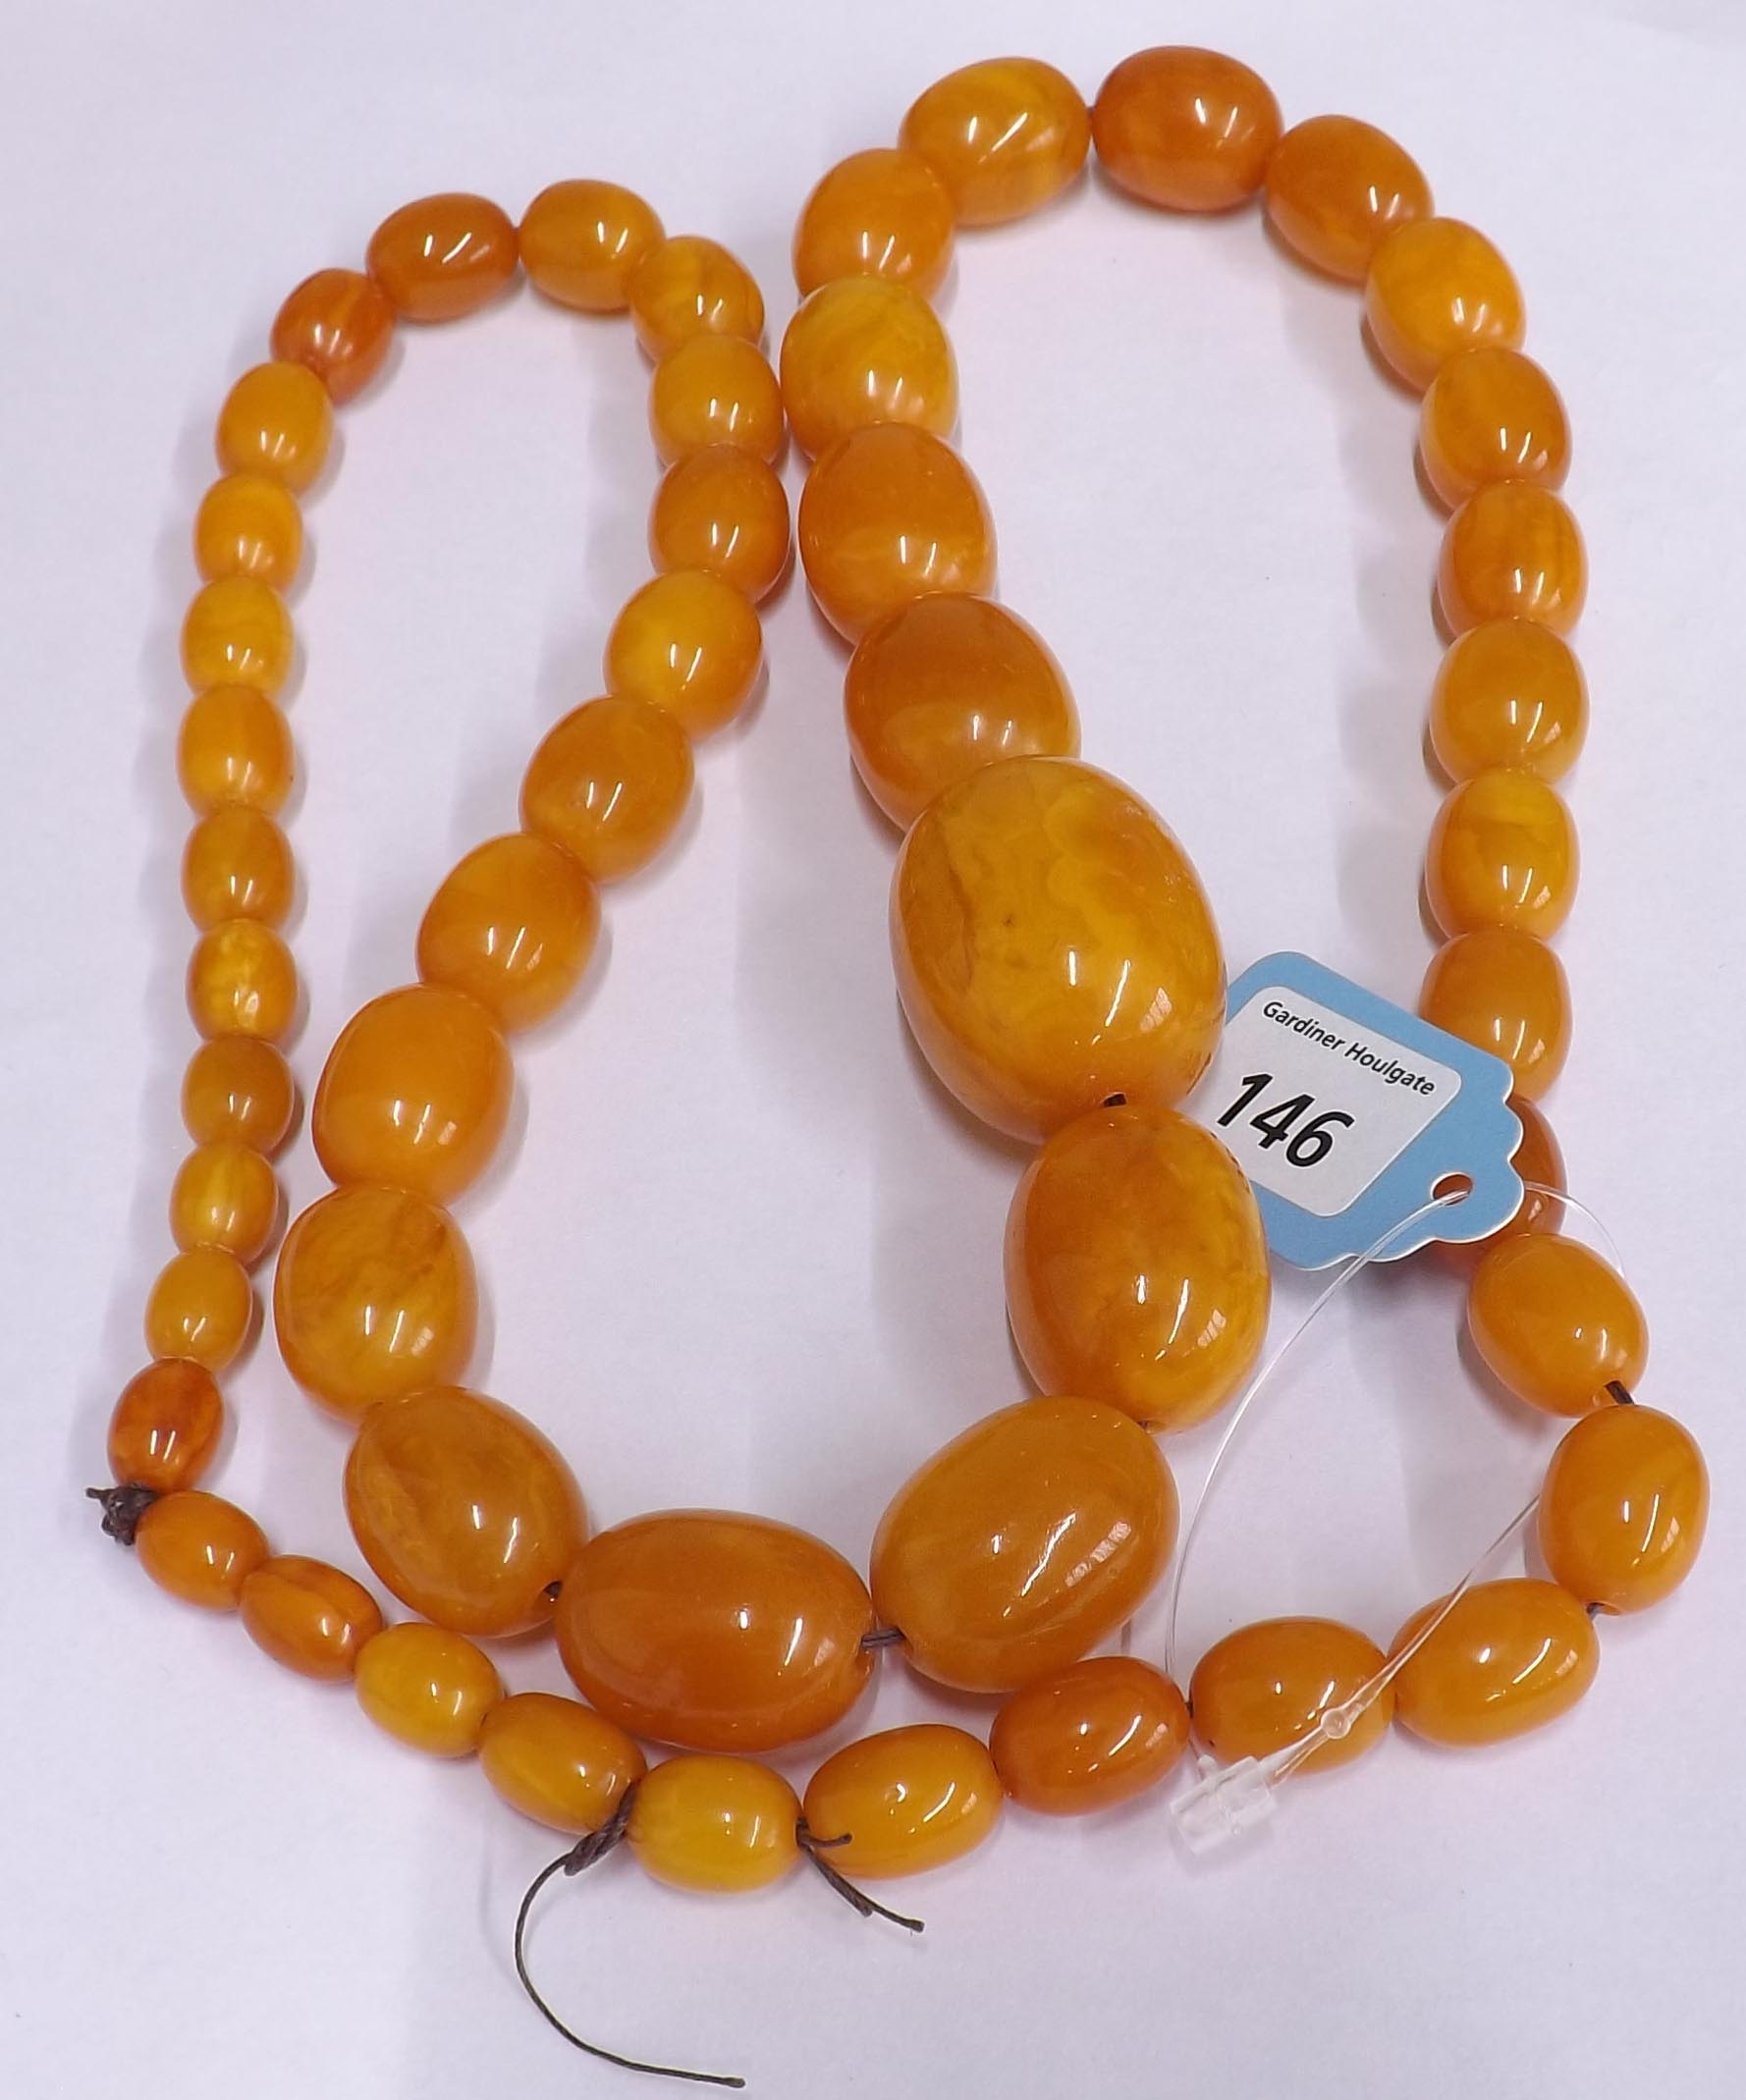 Graduated butterscotch amber bead necklace, consisting of 51 beads, 99.3gm, 10mm- 33mm, 30" long - Image 7 of 7